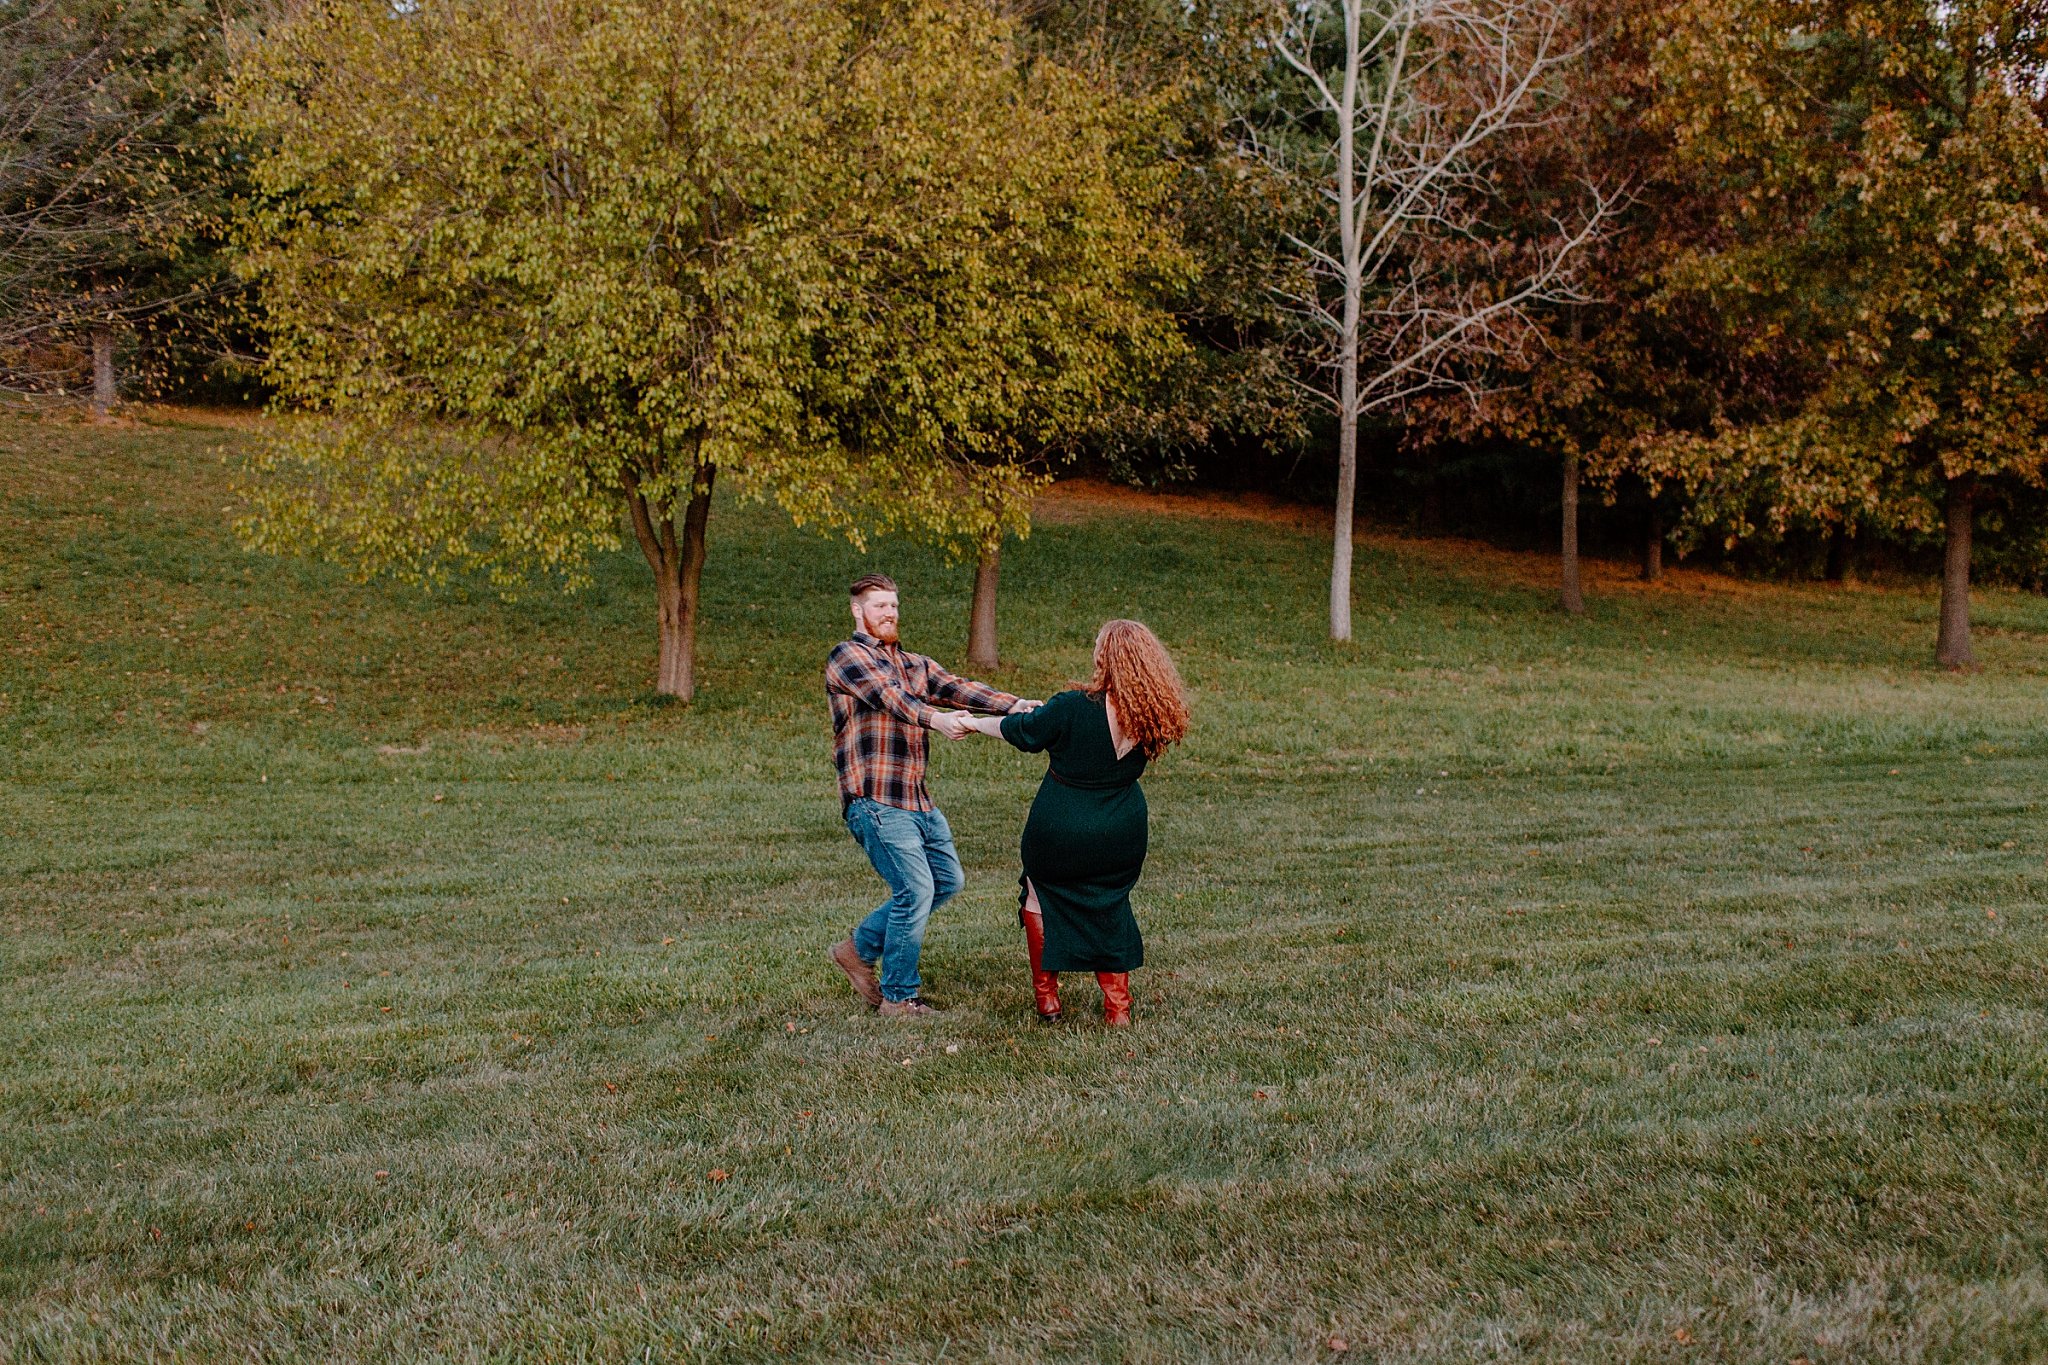  Man and woman dance in open field at Halloween engagement session 